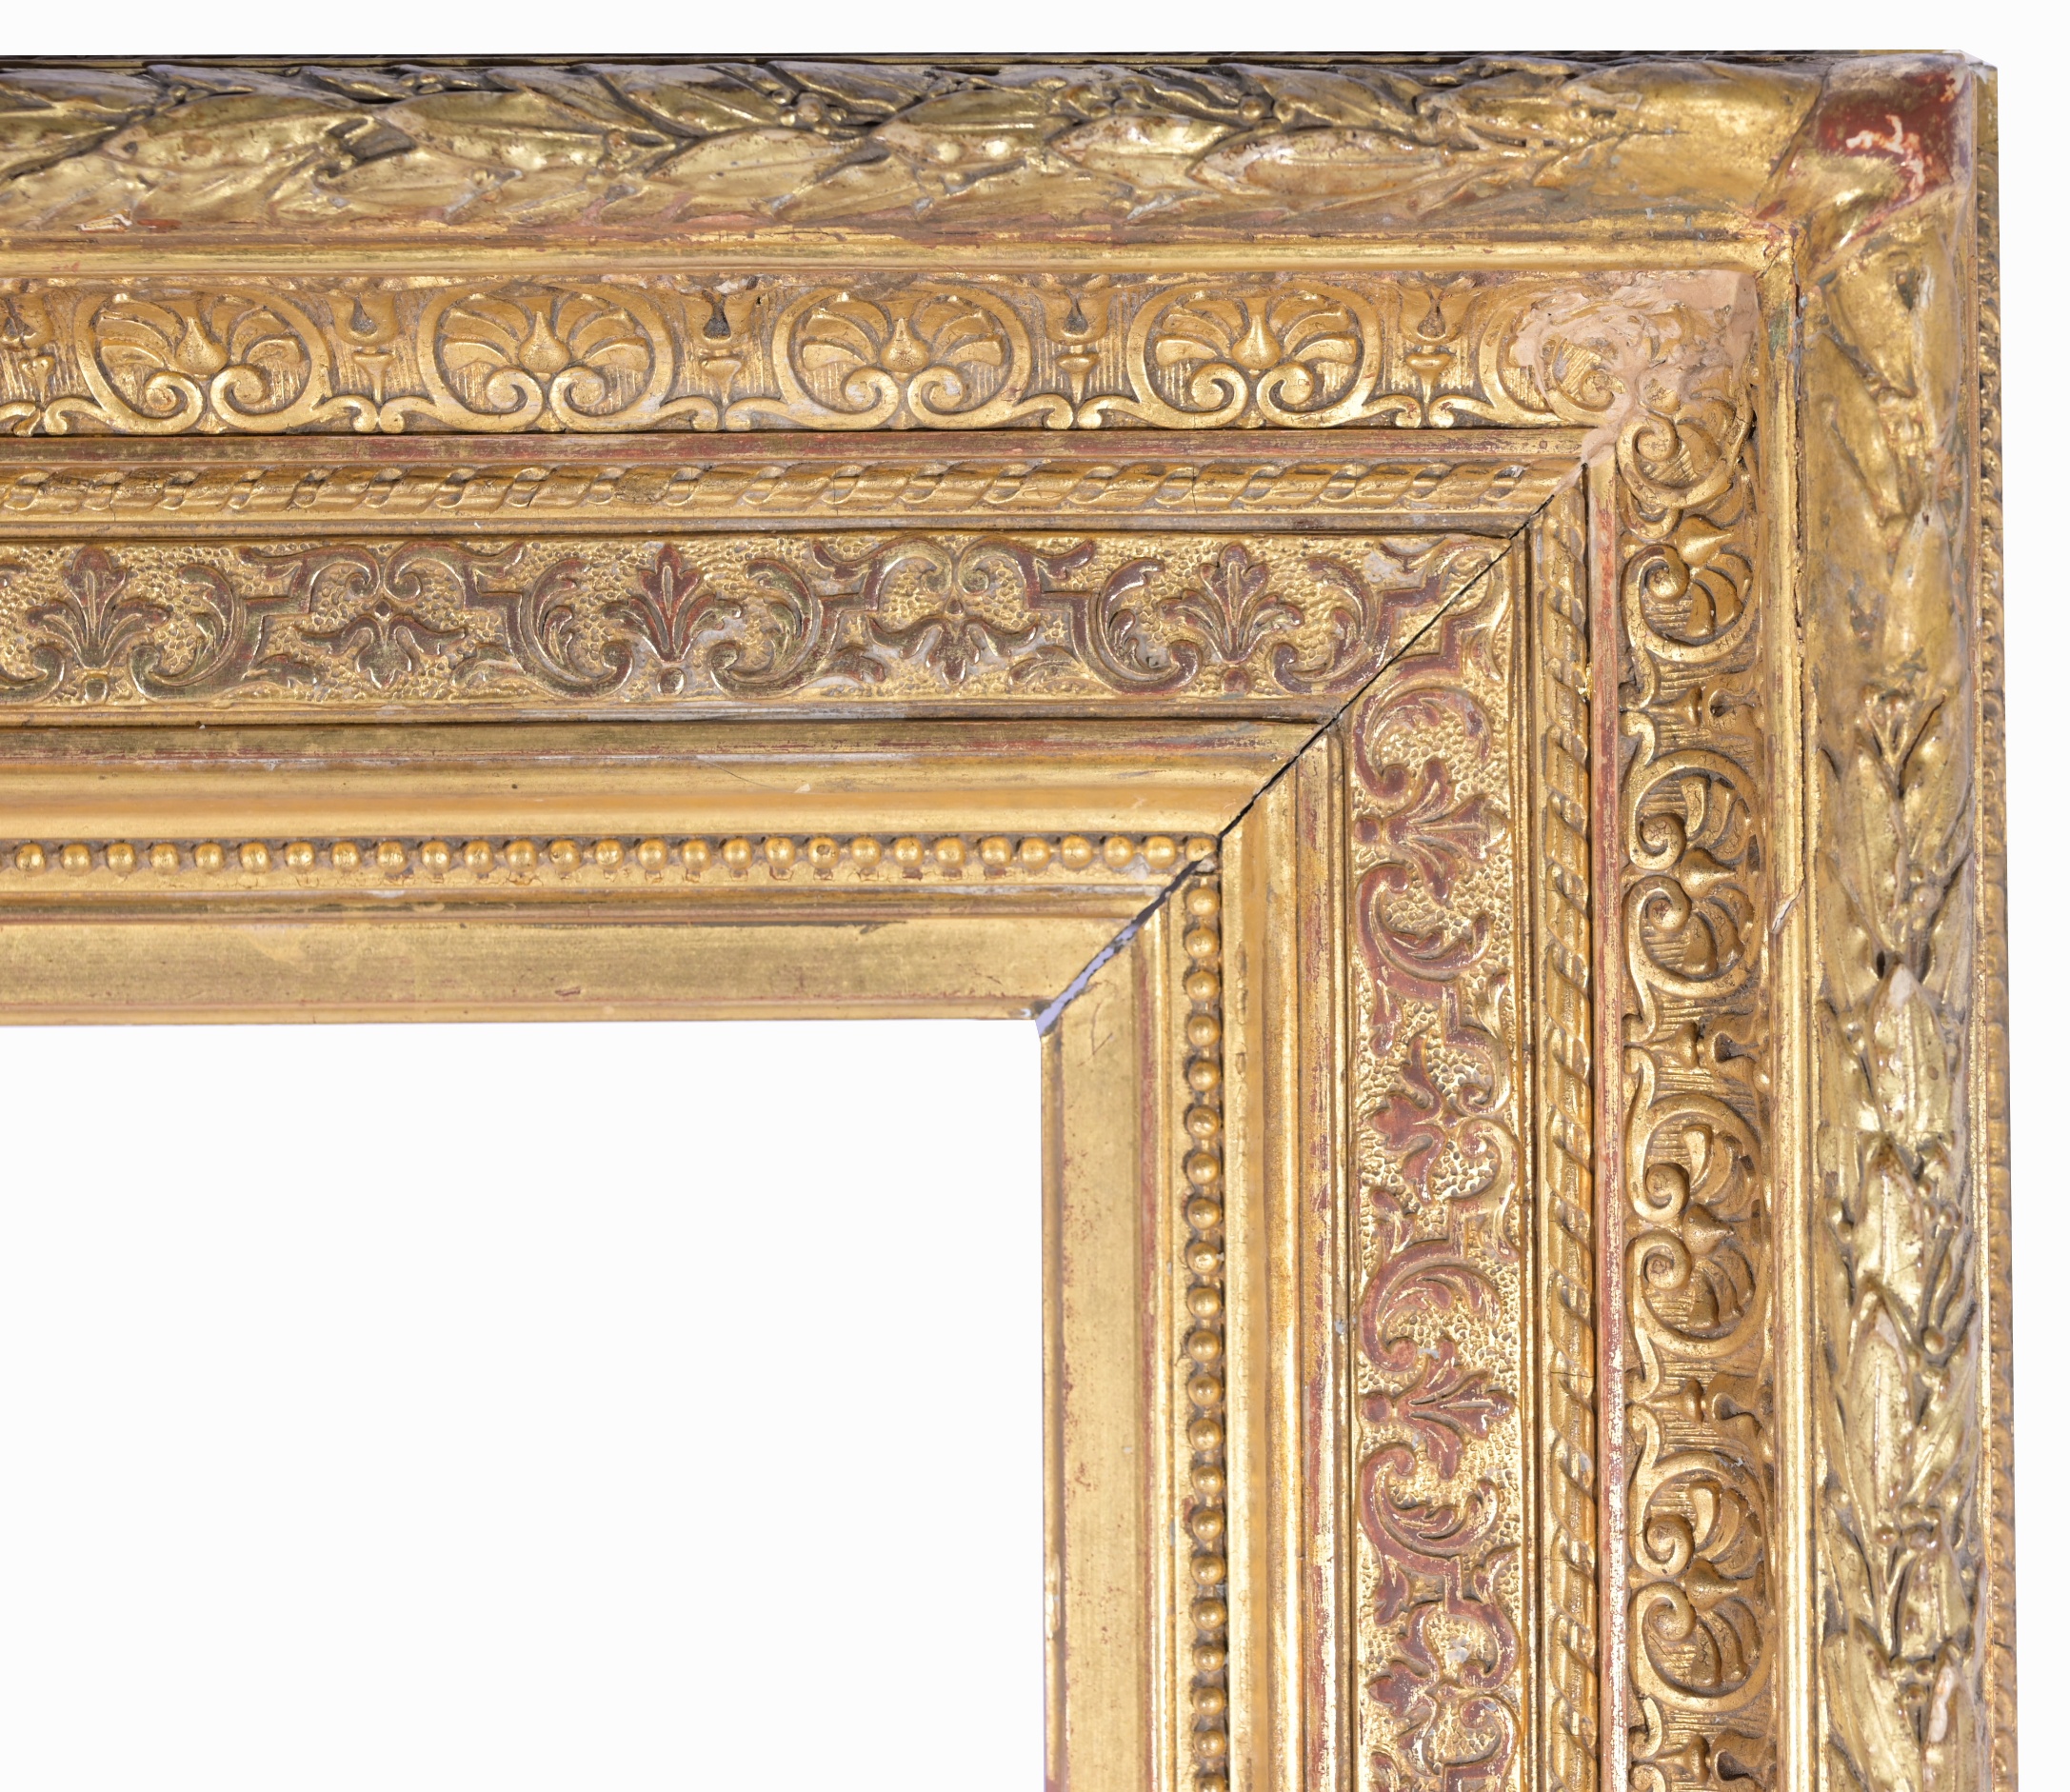 Exceptional 1860's French Gilt Frame - 16 x 24.5 - Image 3 of 11